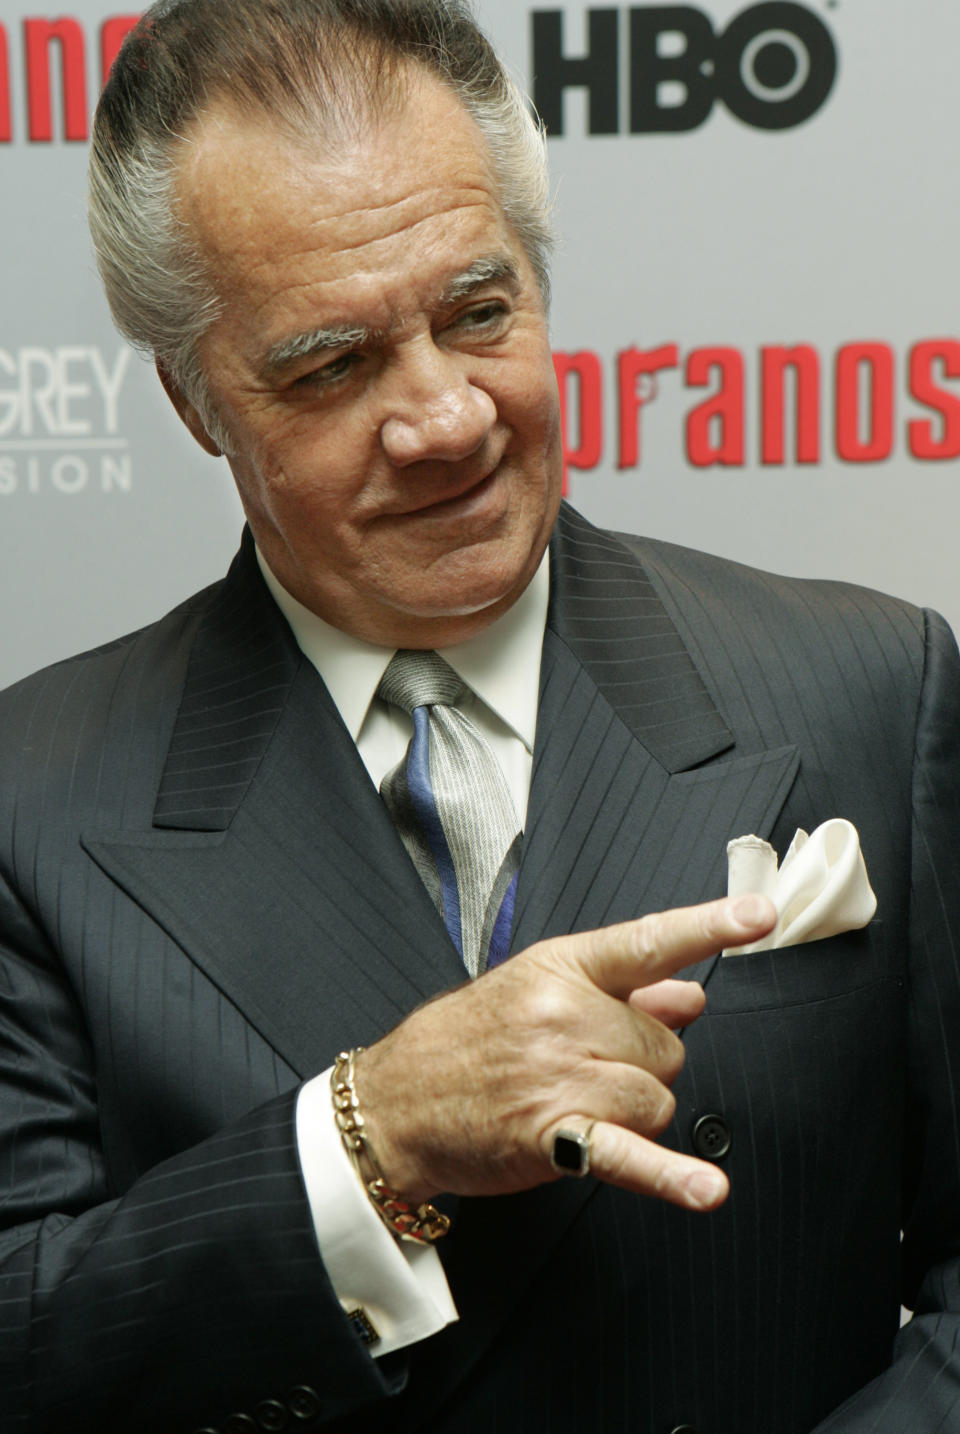 FILE - Tony Sirico, who plays the role of Paulie "Walnuts" Gualtieri in the hit HBO television series "The Sopranos", poses for photographers as he arrives to the world premiere of the sixth season in New York, Tuesday, March 7, 2006. Sirico, who played the impeccably groomed mobster Paulie Walnuts in “The Sopranos” and brought his tough-guy swagger to films including “Goodfellas,” died Friday, July 8, 2022. He was 79. (AP Photo/Stuart Ramson, File)